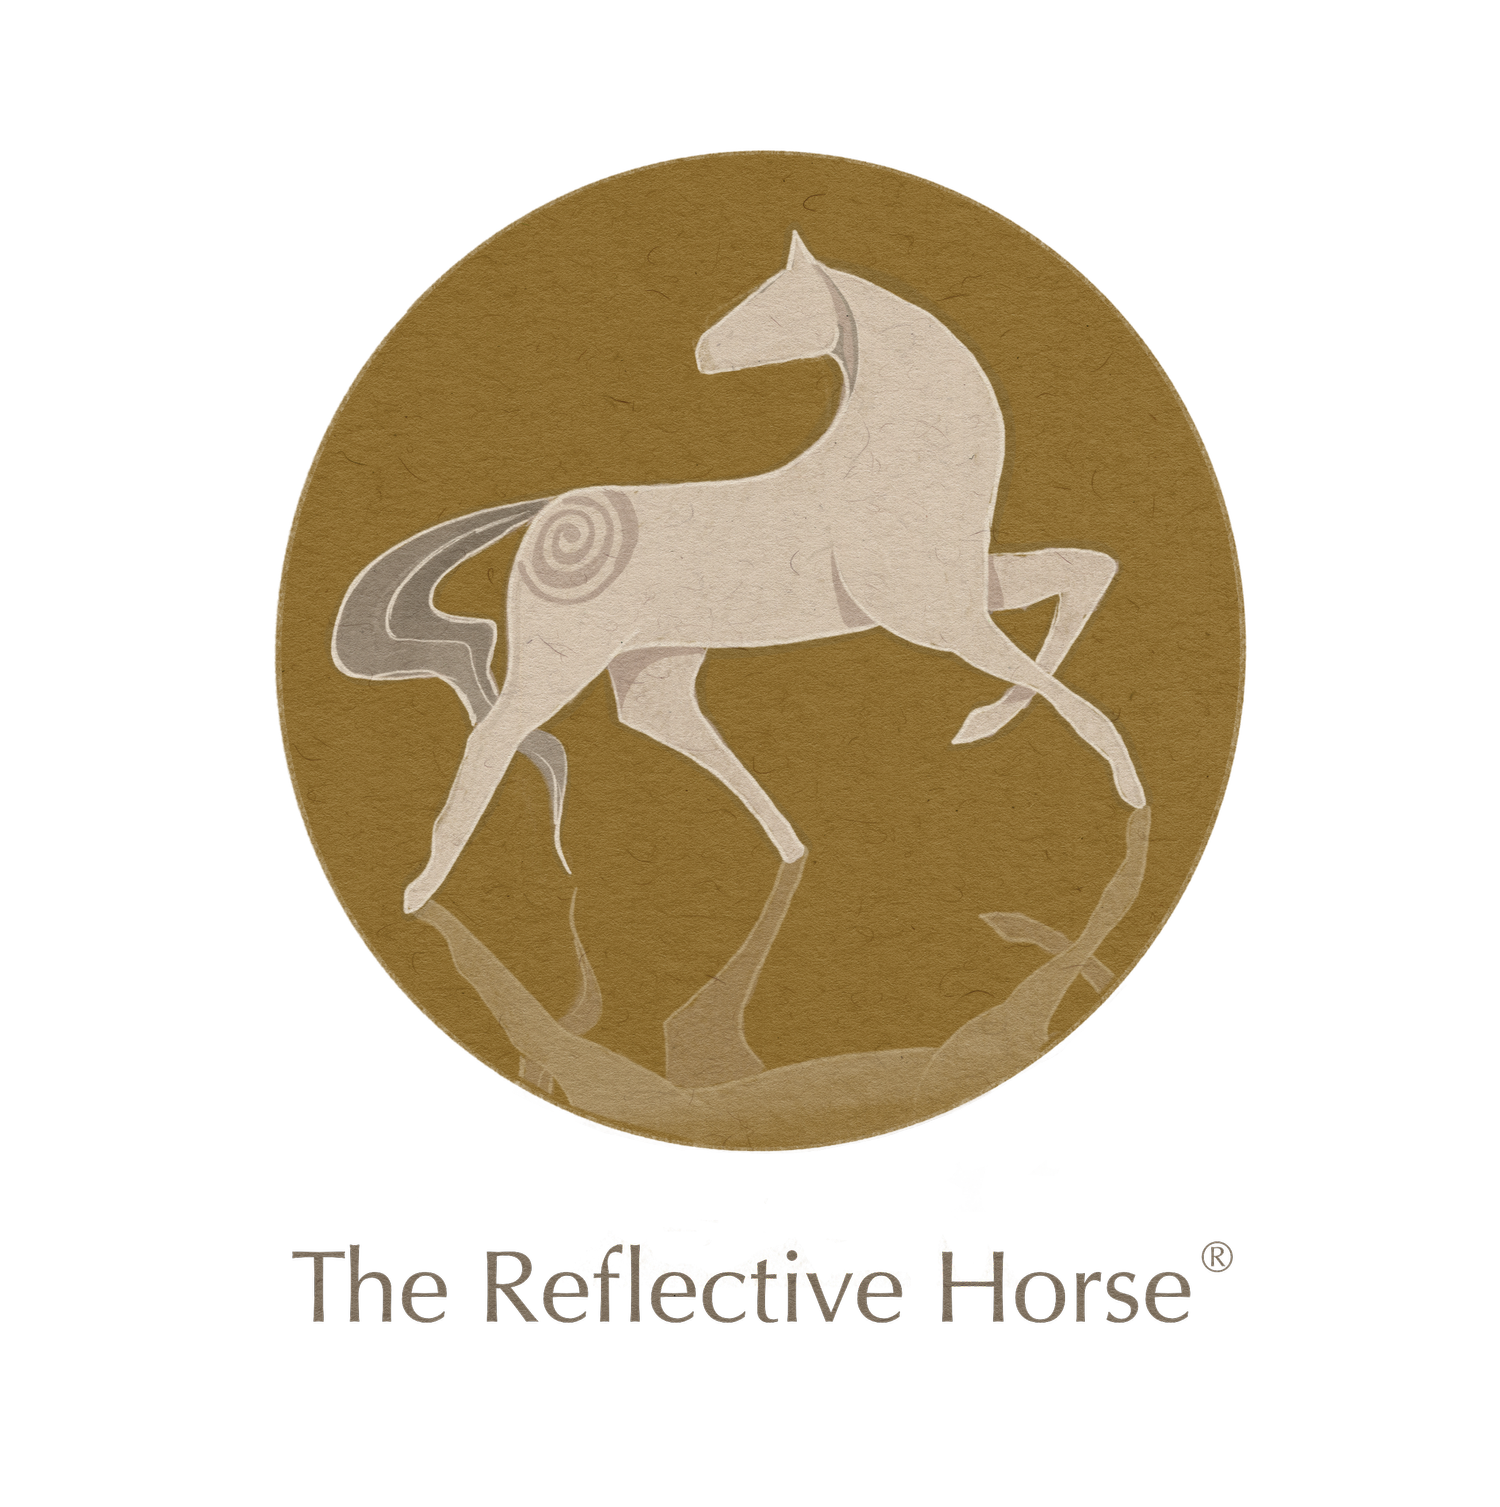 The Reflective Horse